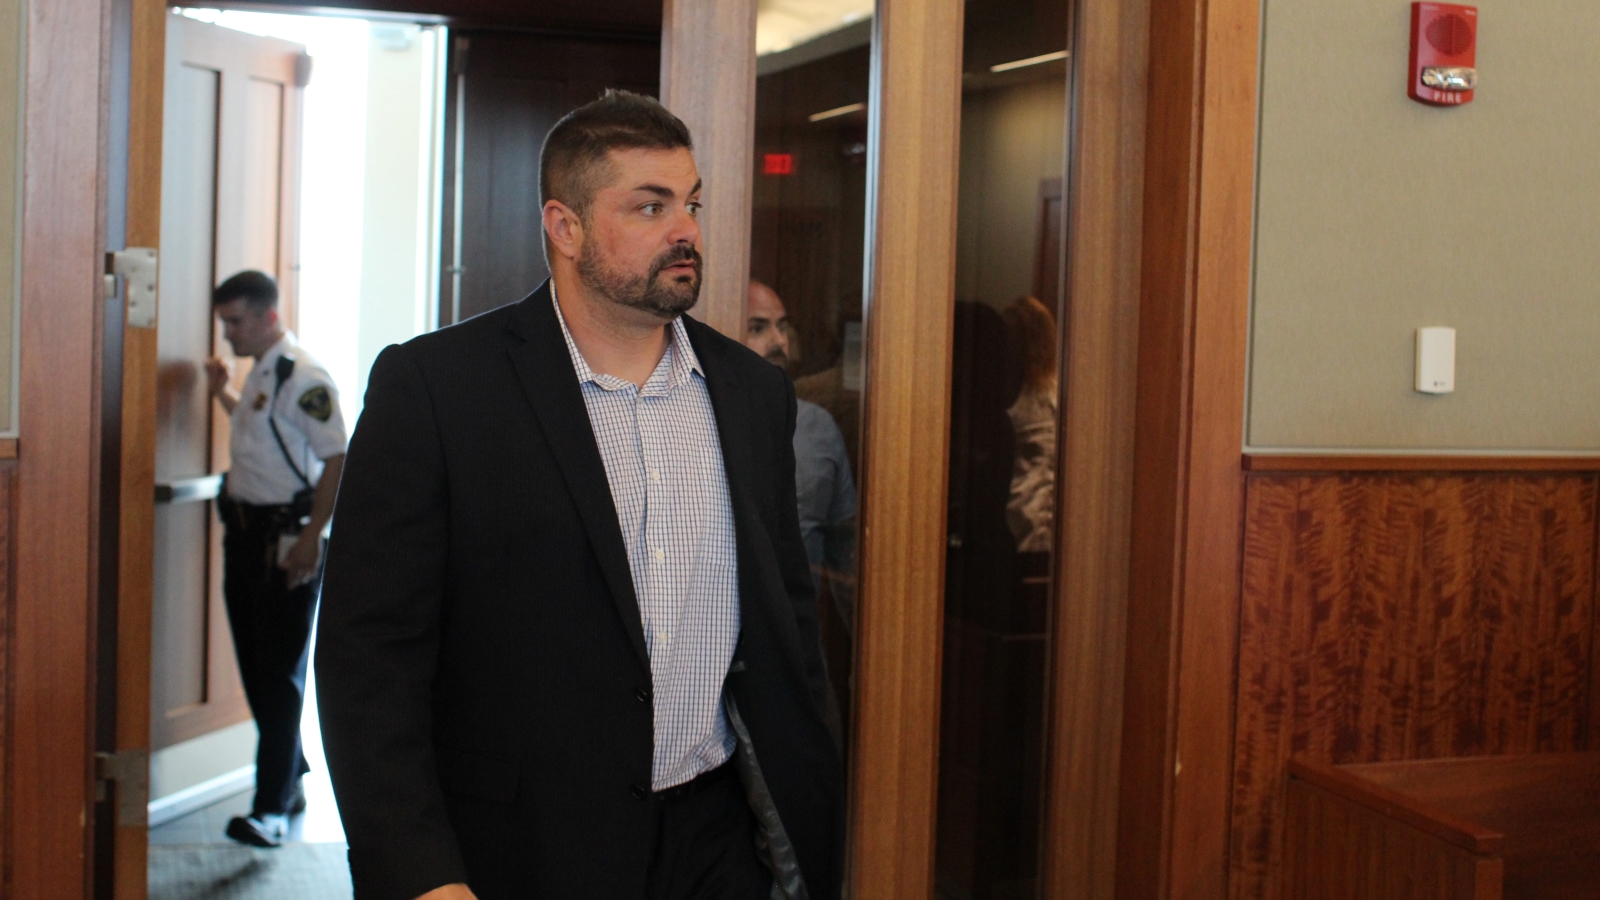 Former Fall River police officer Michael Pessoa walks into a courtroom at the city's Superior Court.